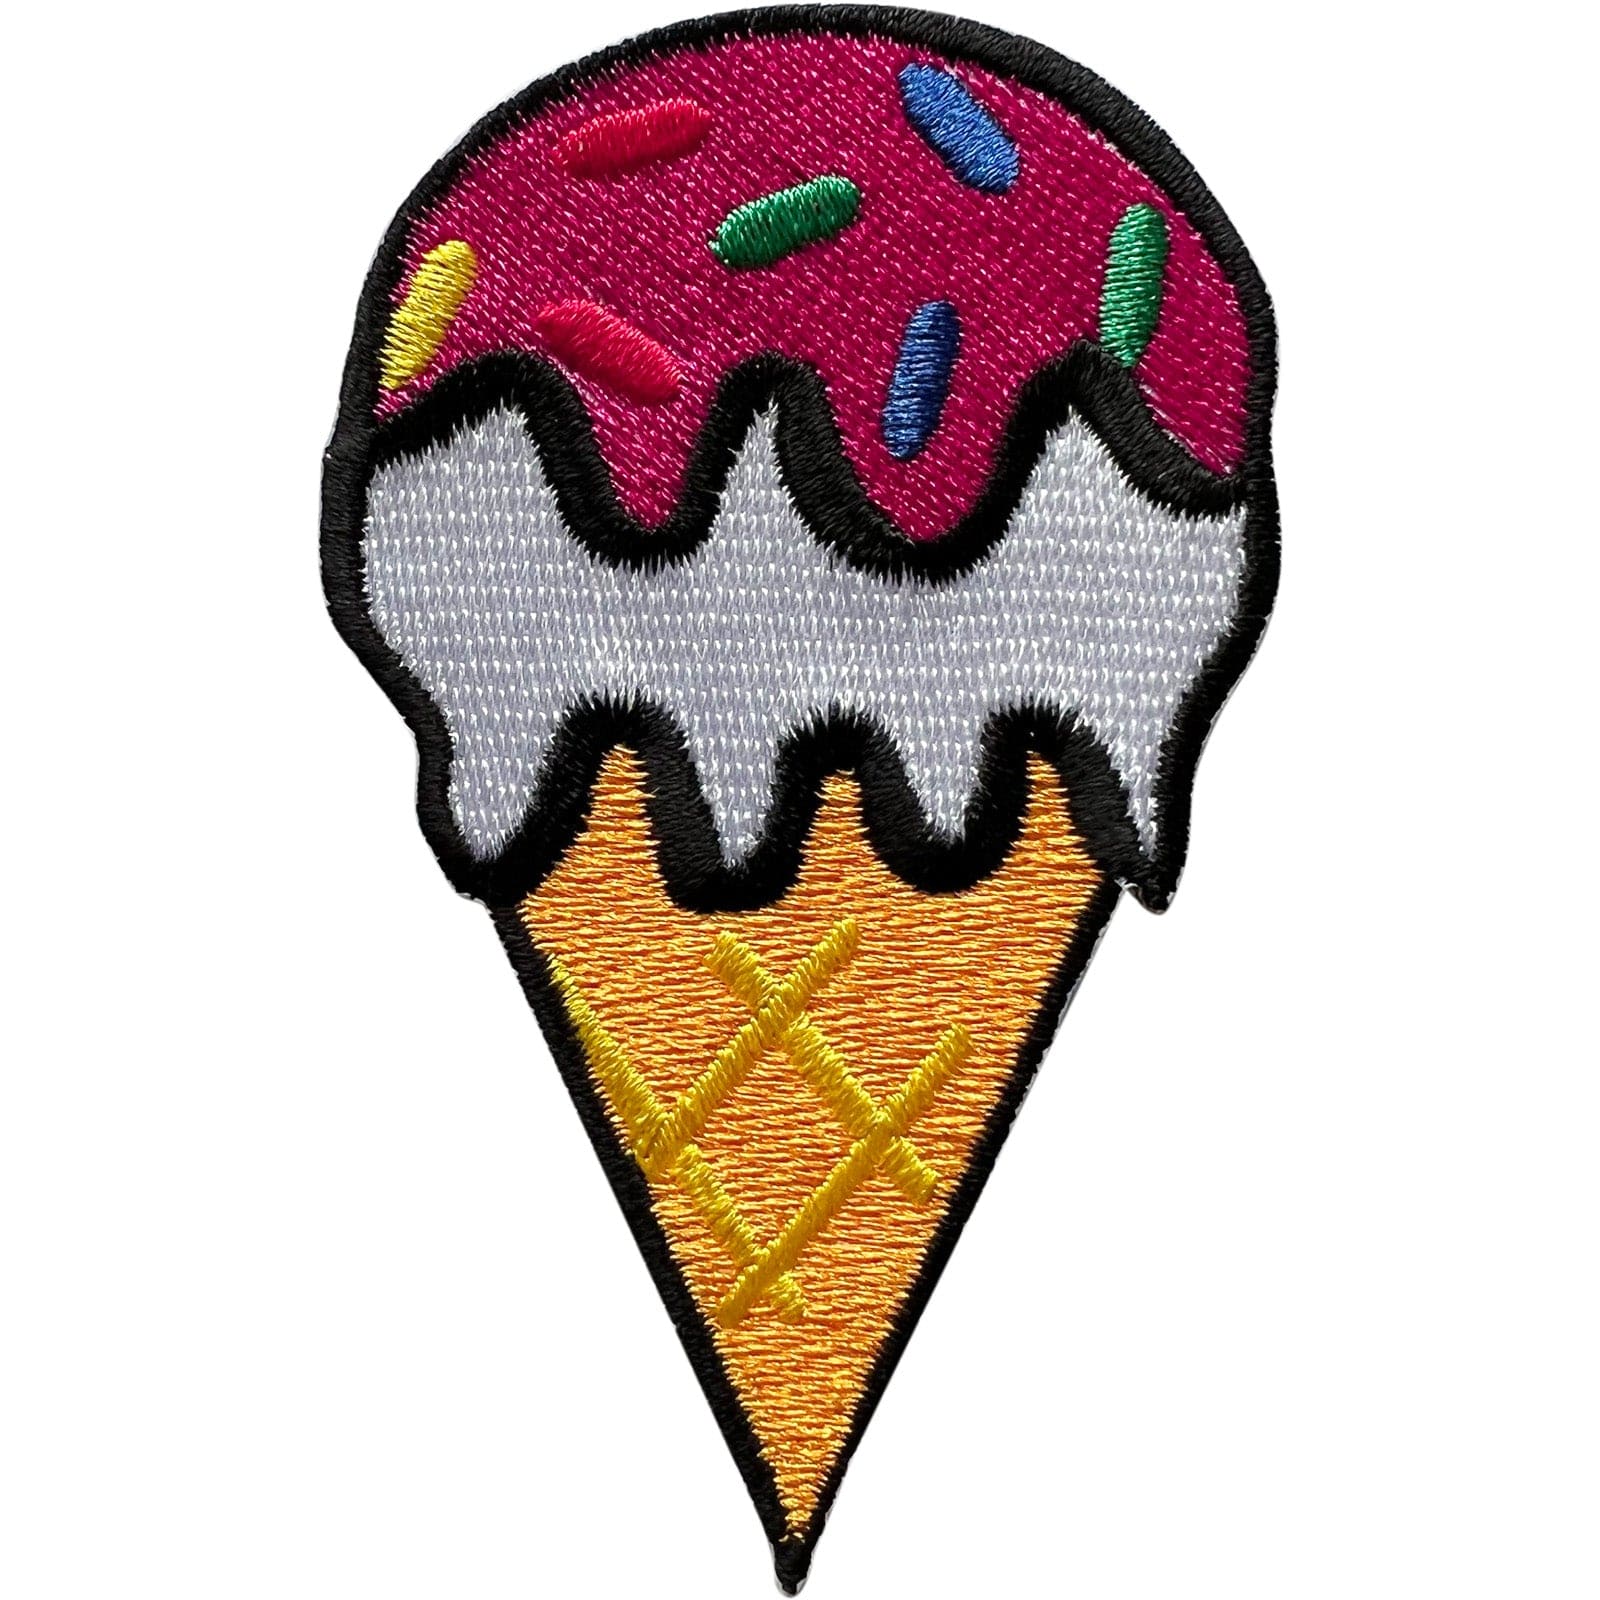 Cute Calico Cat on Fluffy Ice Cream Cone Iron on Patch, Embroidery Patch,  Cute Kawaii Patch, Sew on Patch, Craft Supply, DIY Patches 11 